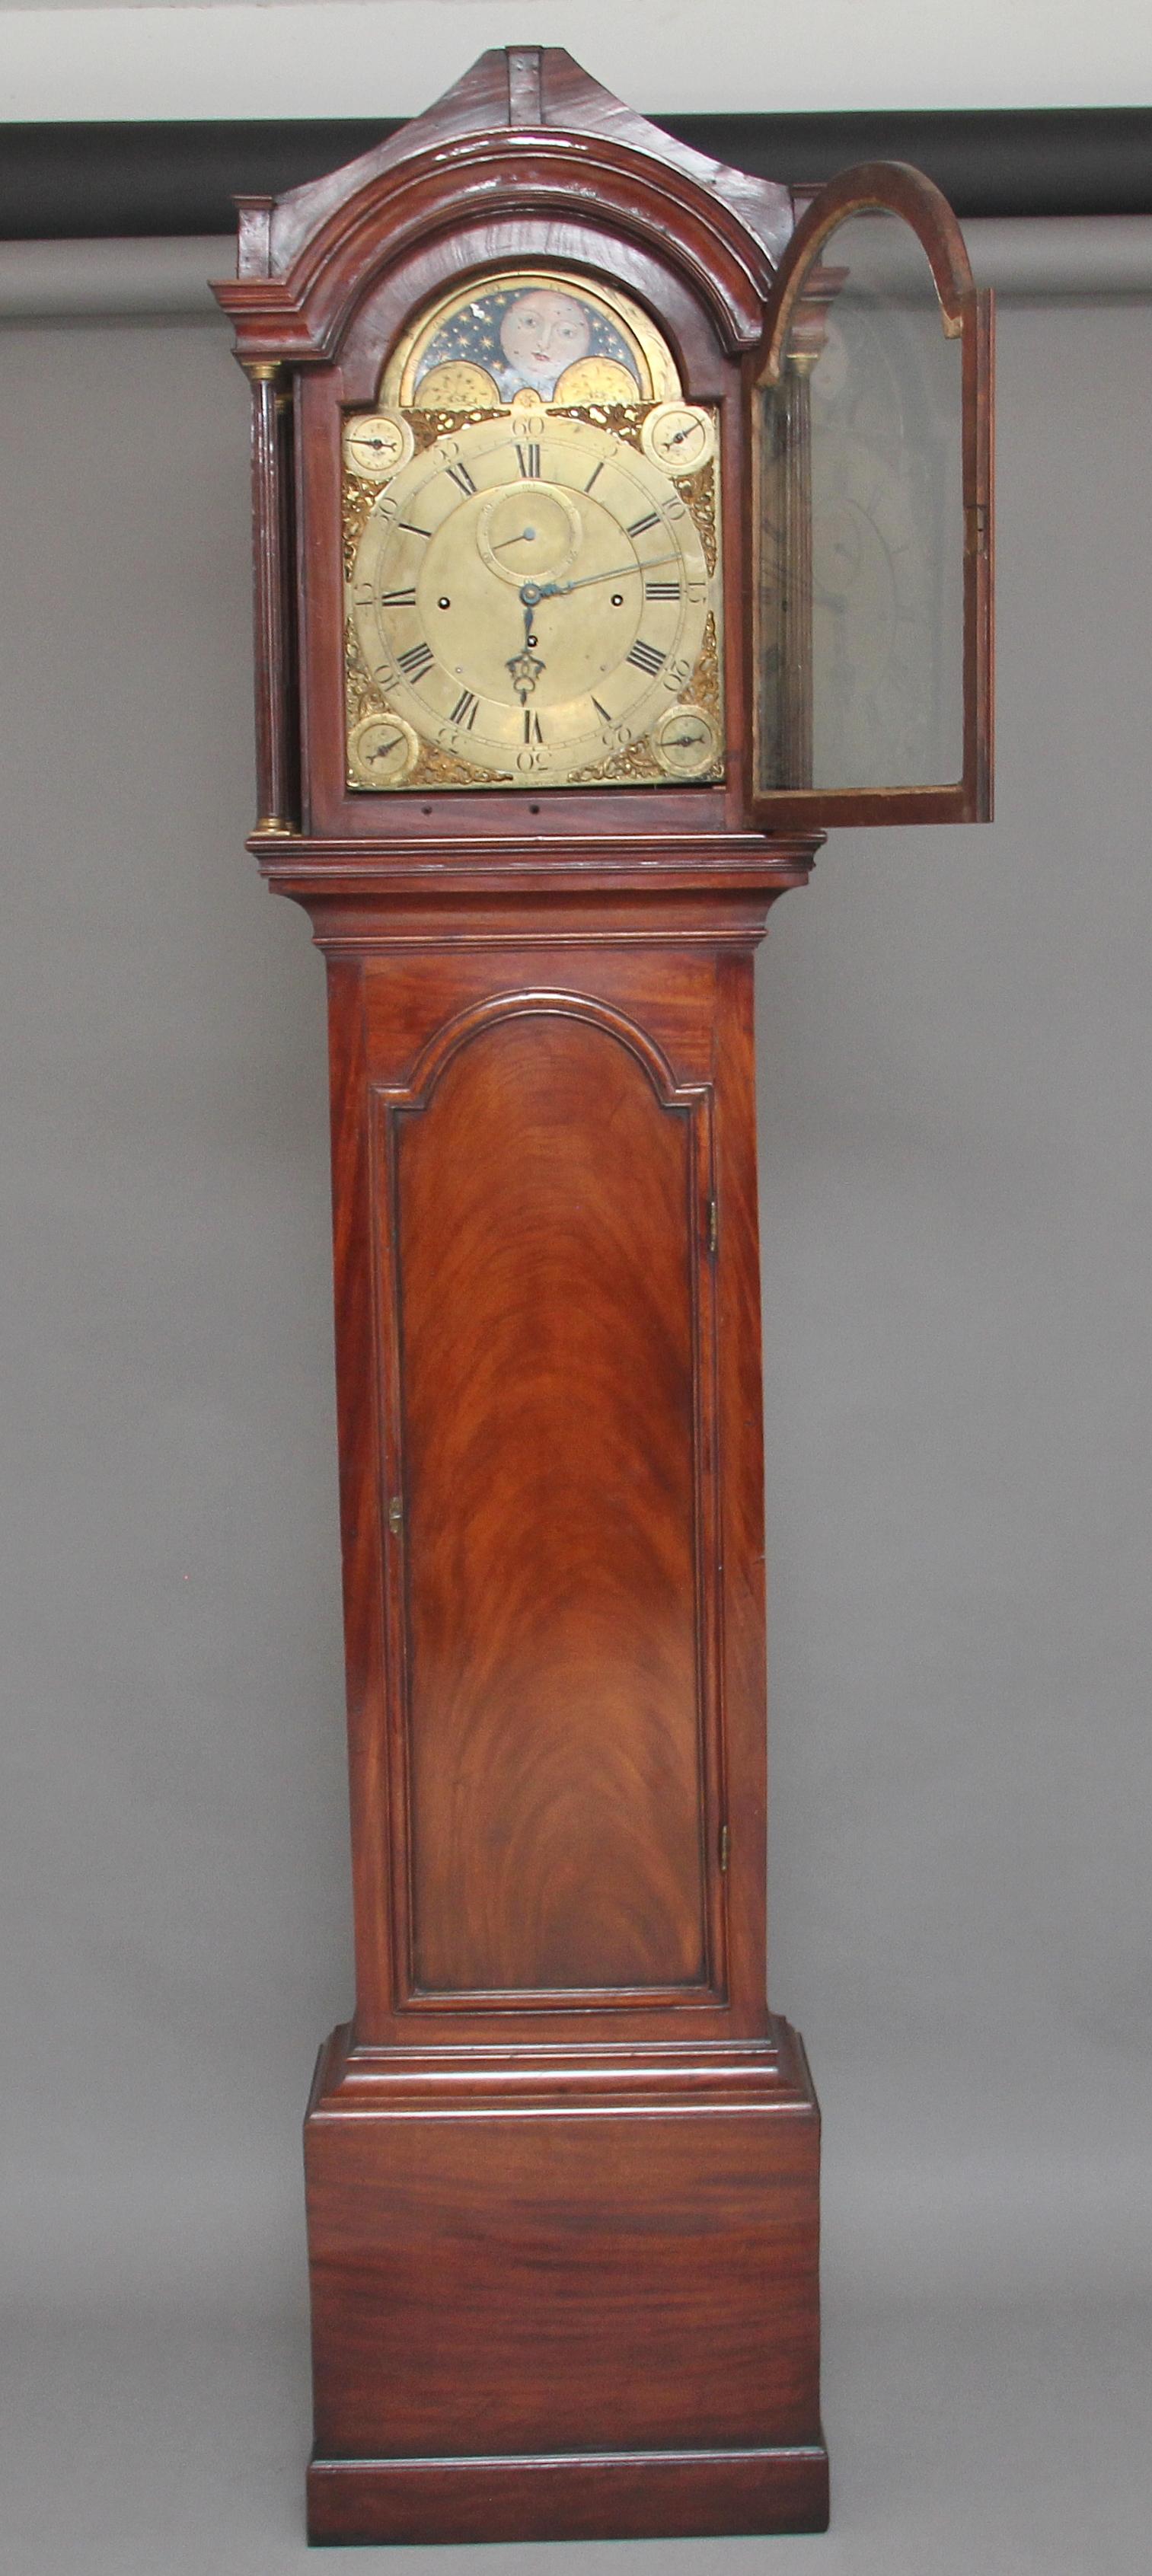 18th century mahogany longcase clock by John Wood of Grantham (known to be working from 1753-1797) an imposing mahogany clock with moon phase, quarter chiming and day / date functions. The brass dial has hours, minutes and subsidiary second hands